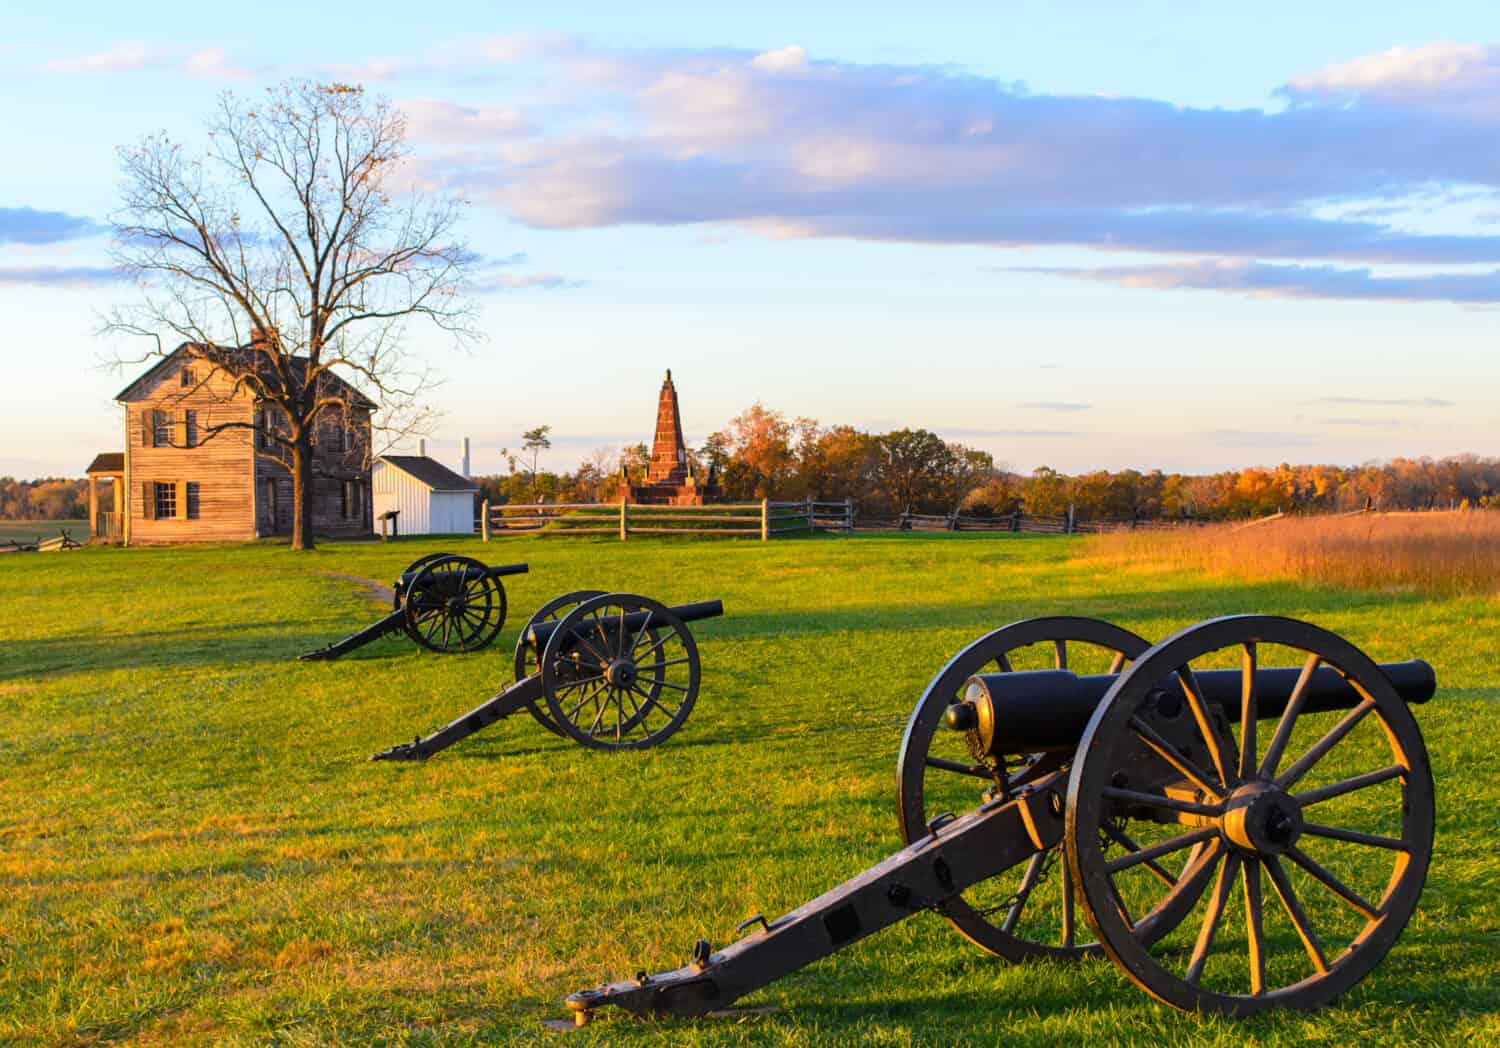 Historic Henry House and cannons at Manassas National Battlefield Park during sunset